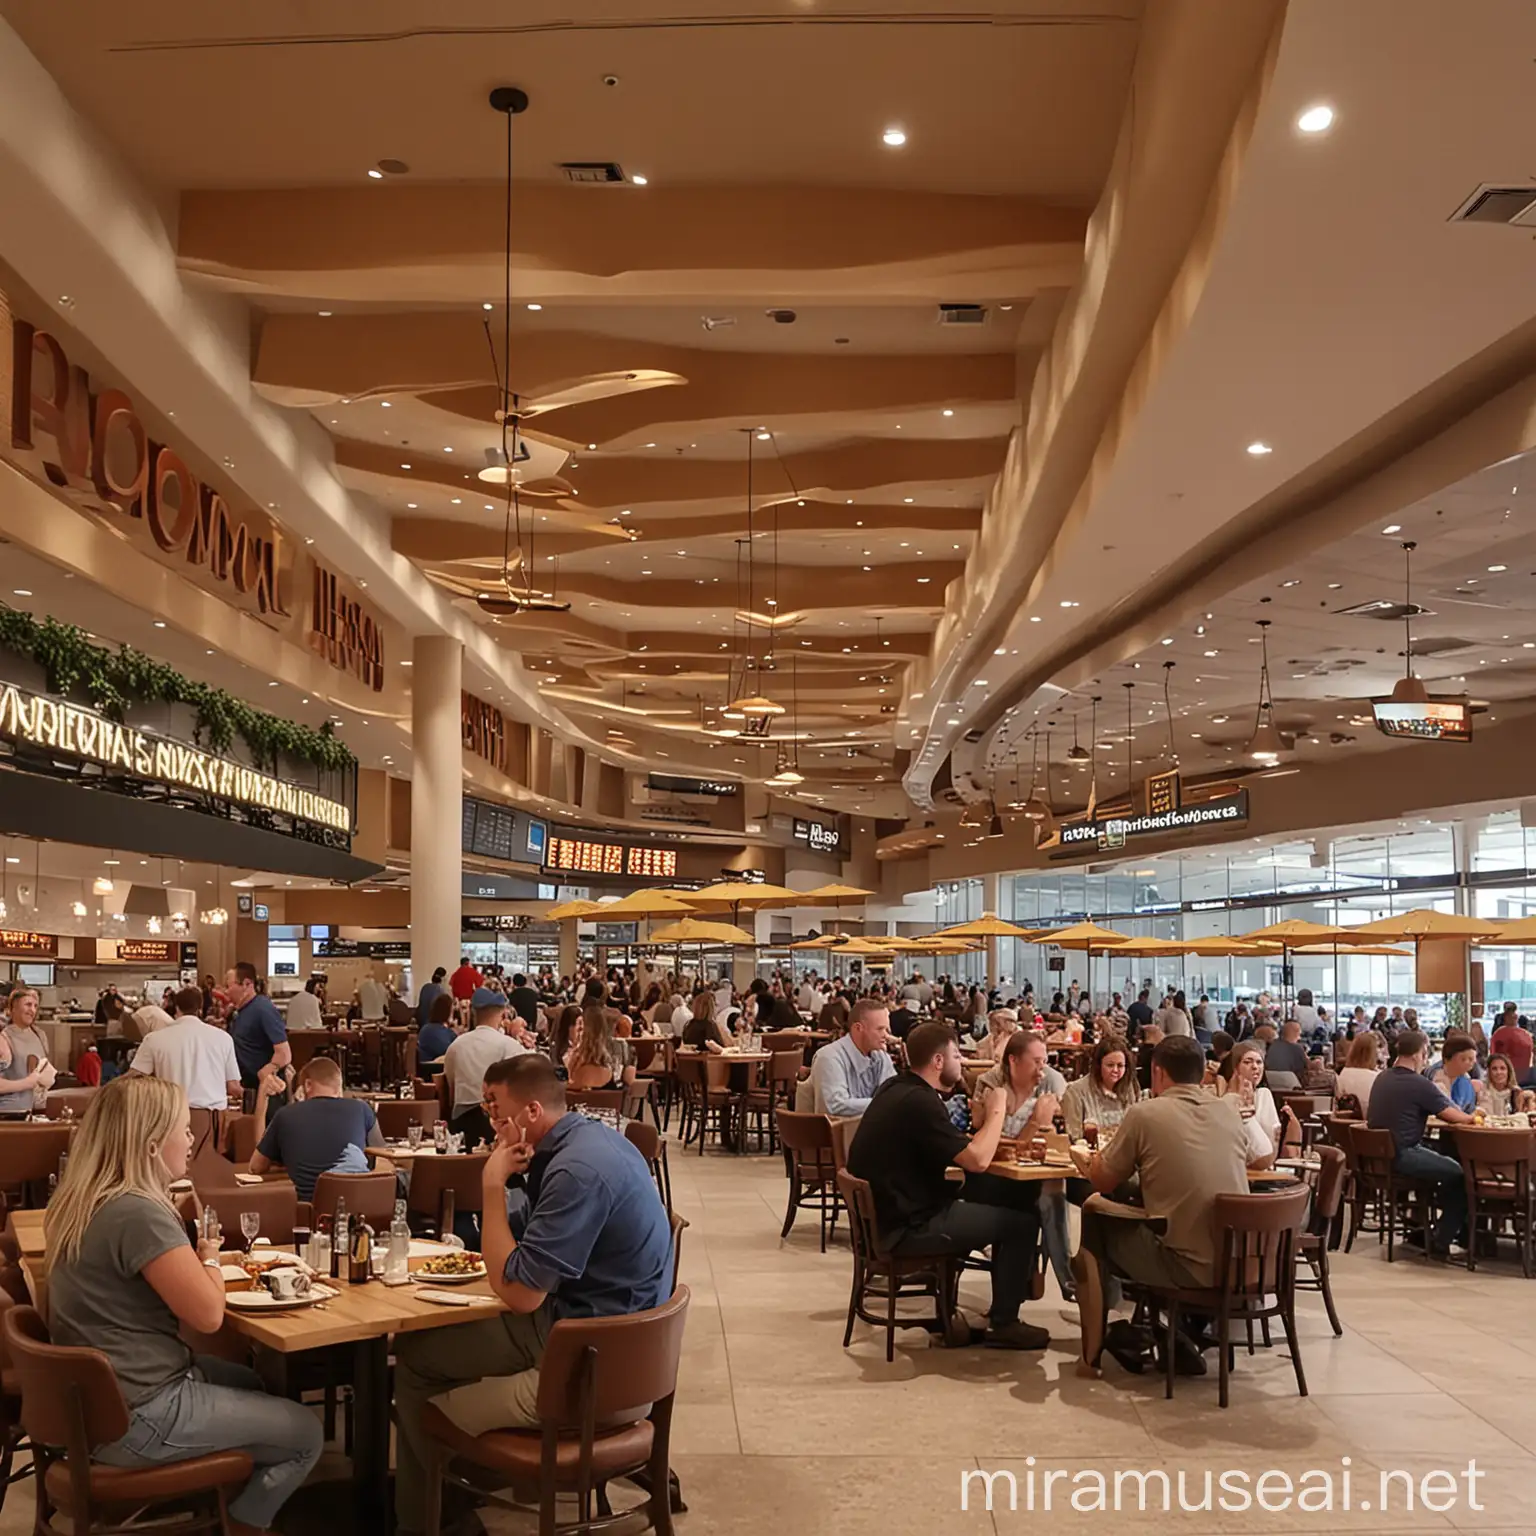 realistic scene with people eating at local restaurants in phoenix sky harbor airport